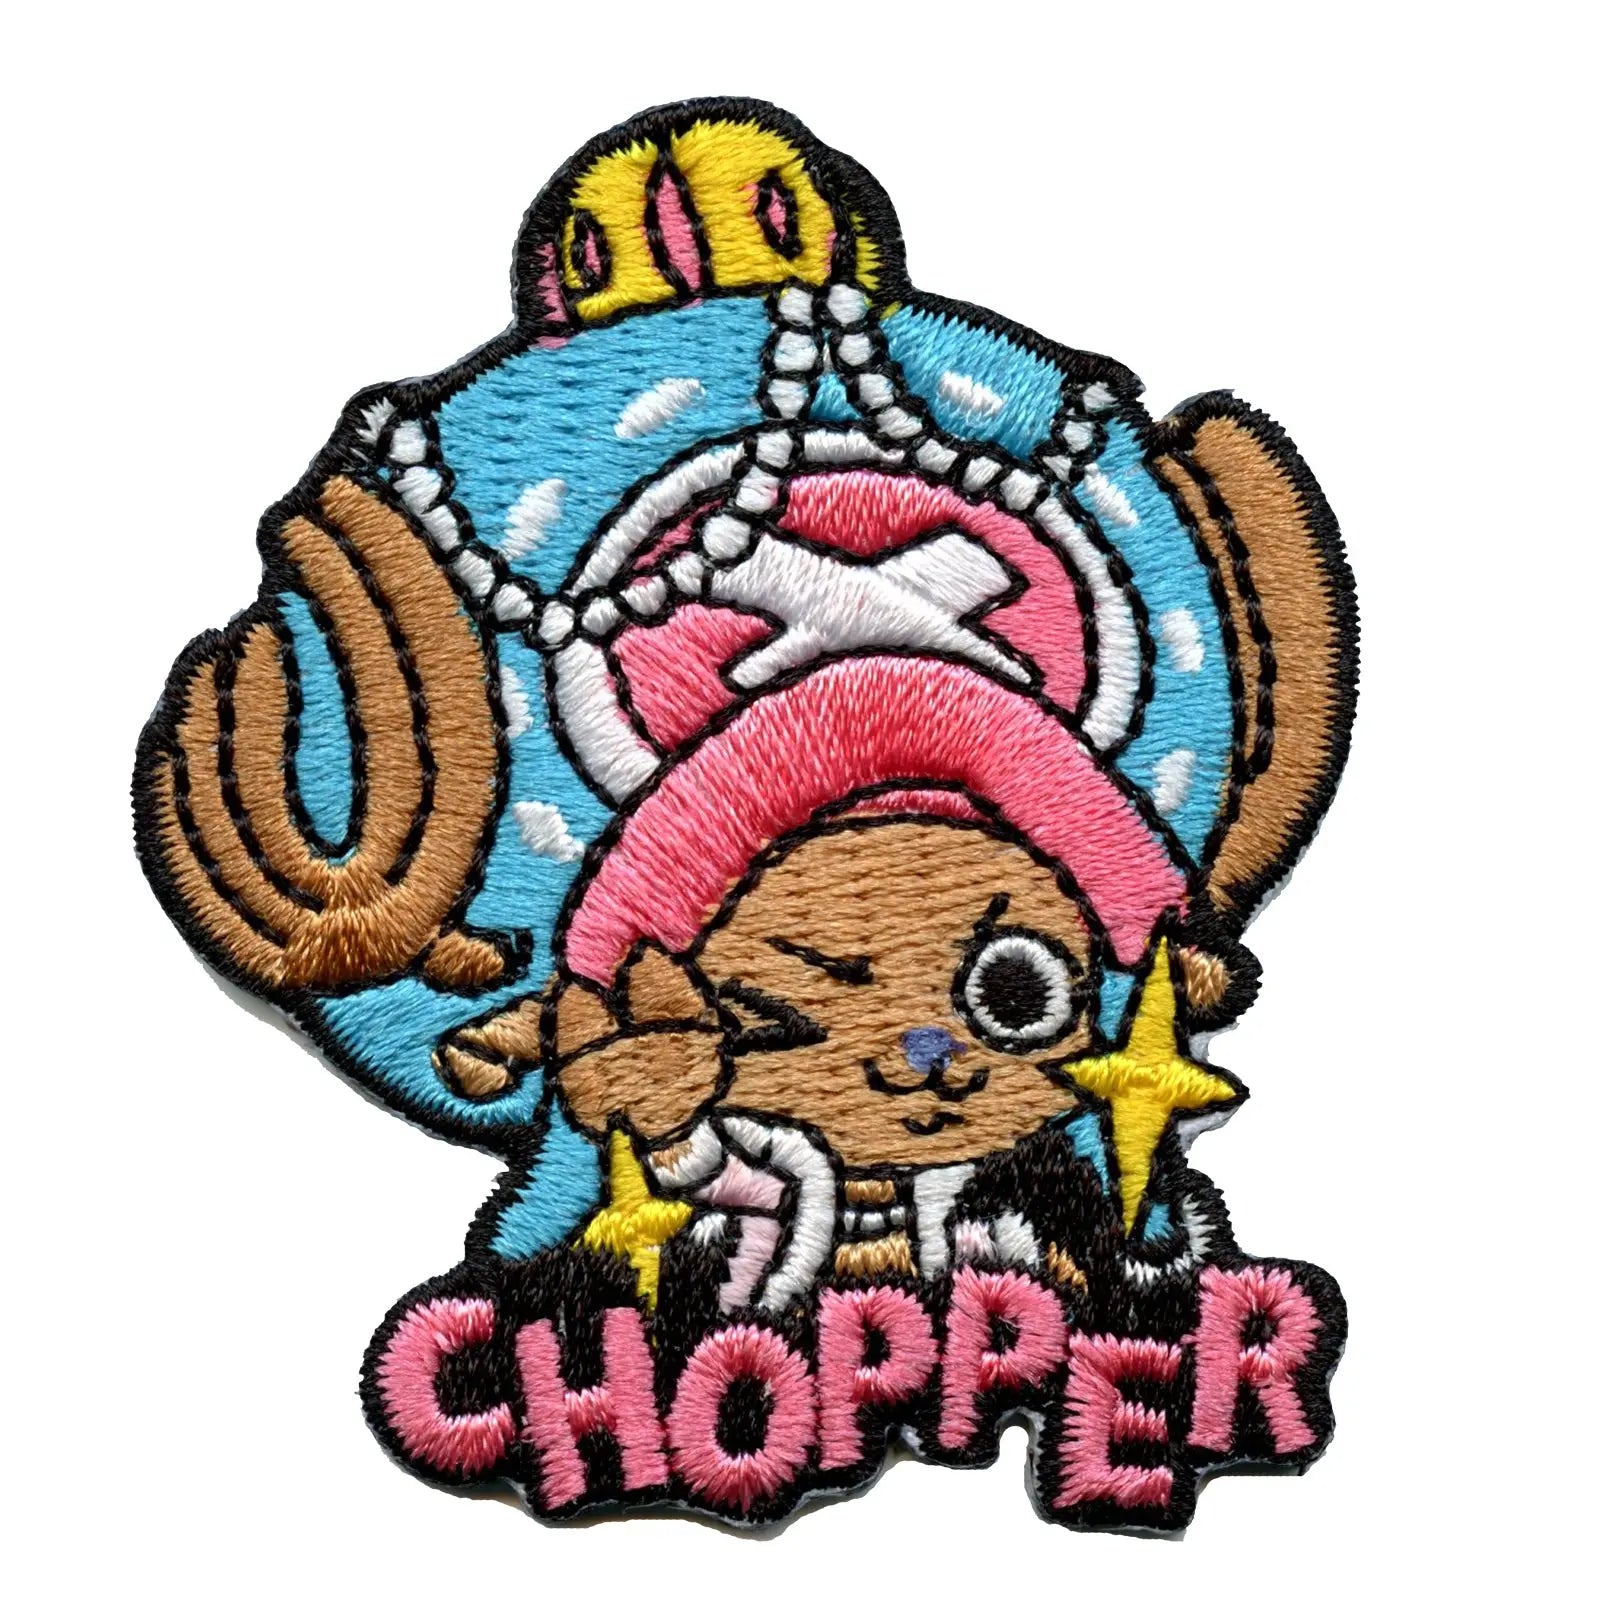 Chopper without Collector